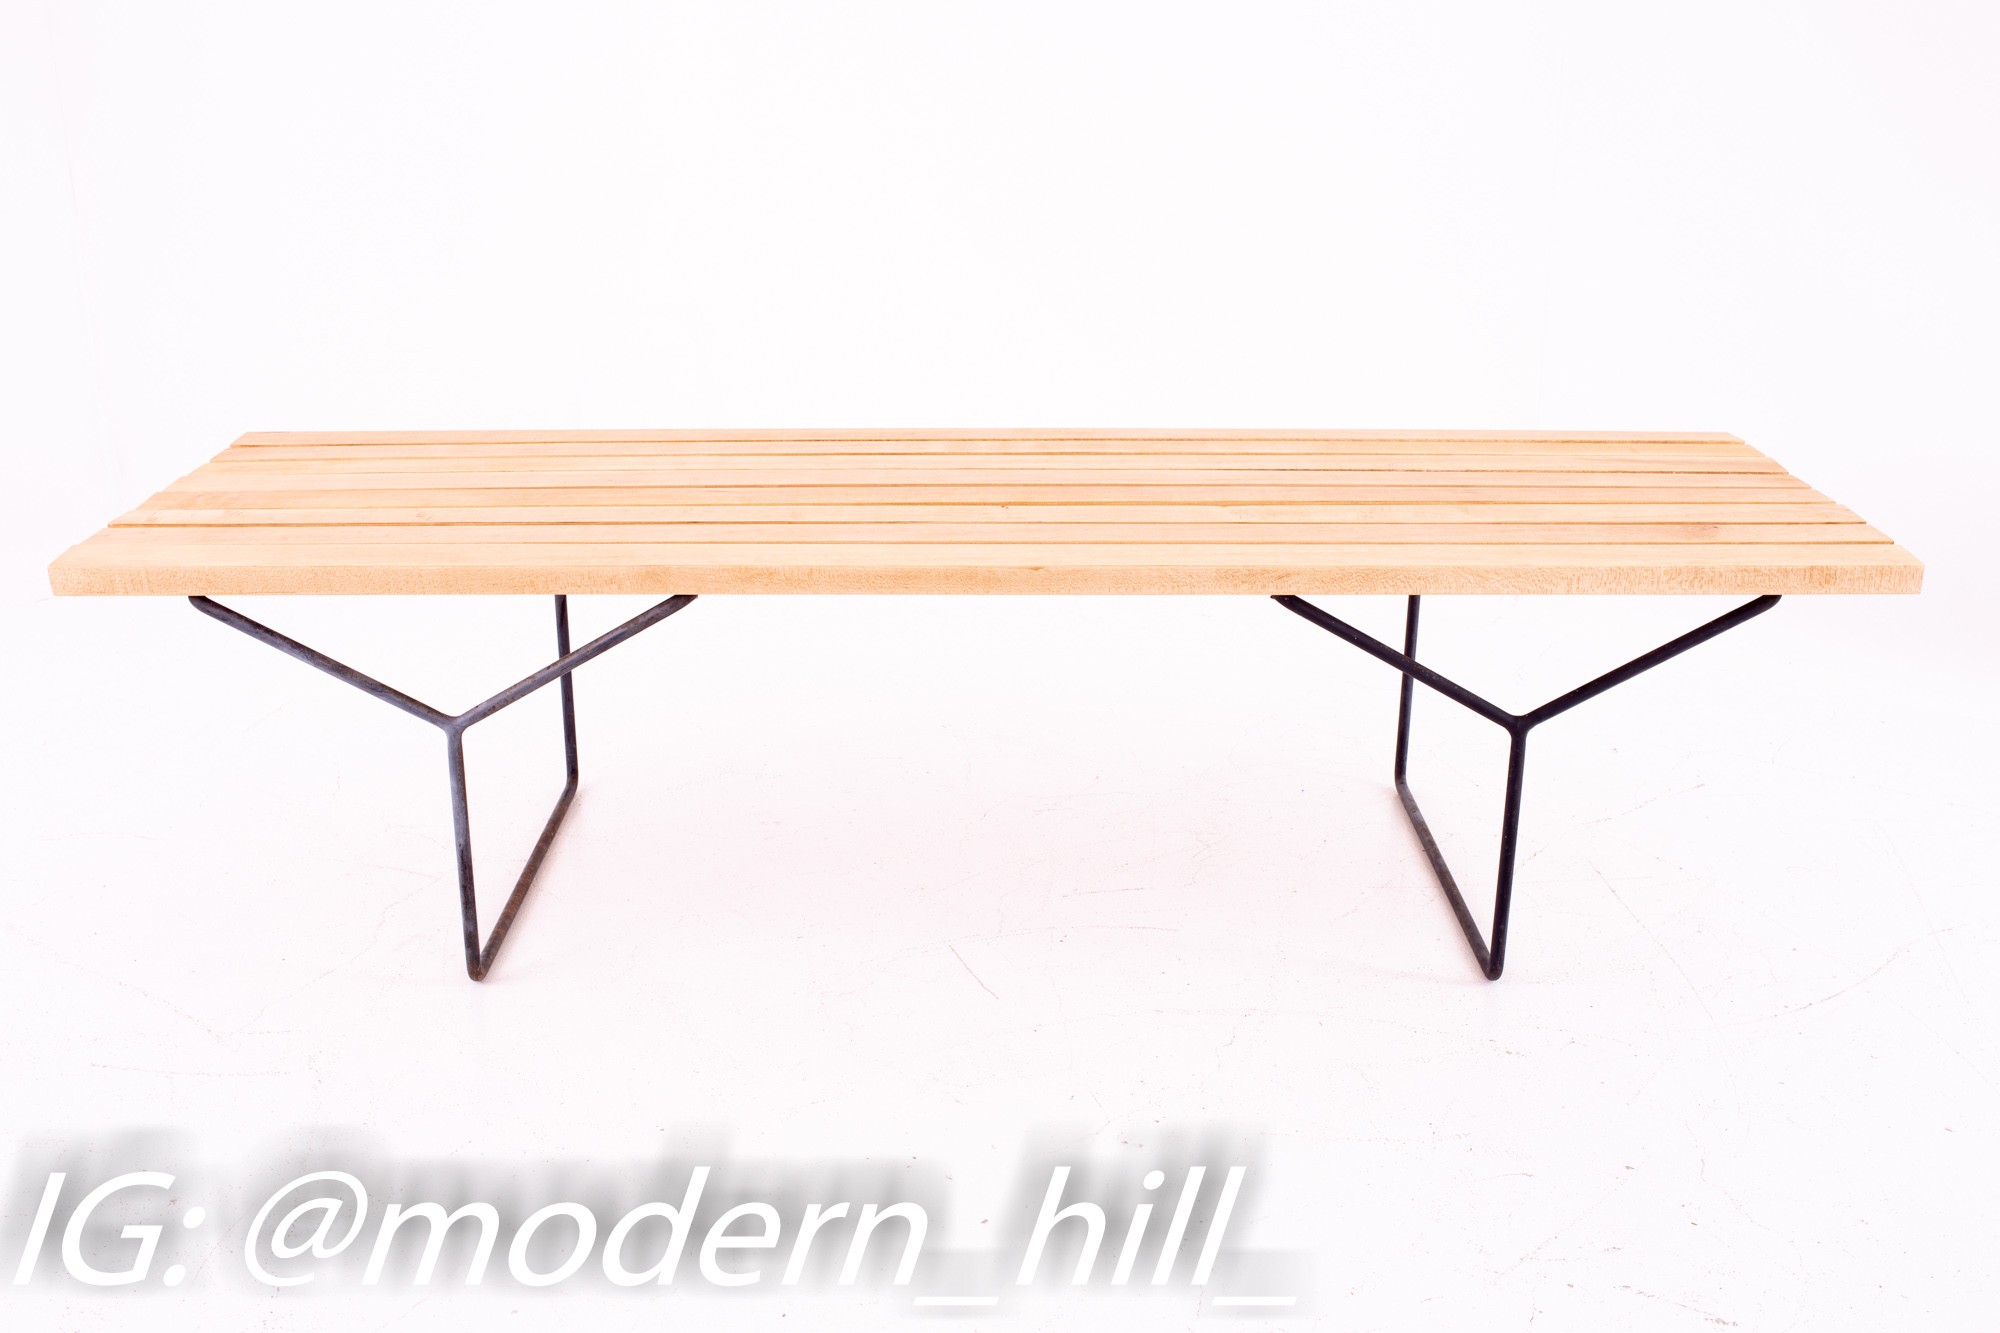 Restored Harry Bertoia for Knoll Mid Century Maple Slat Bench with Wrought Iron Legs